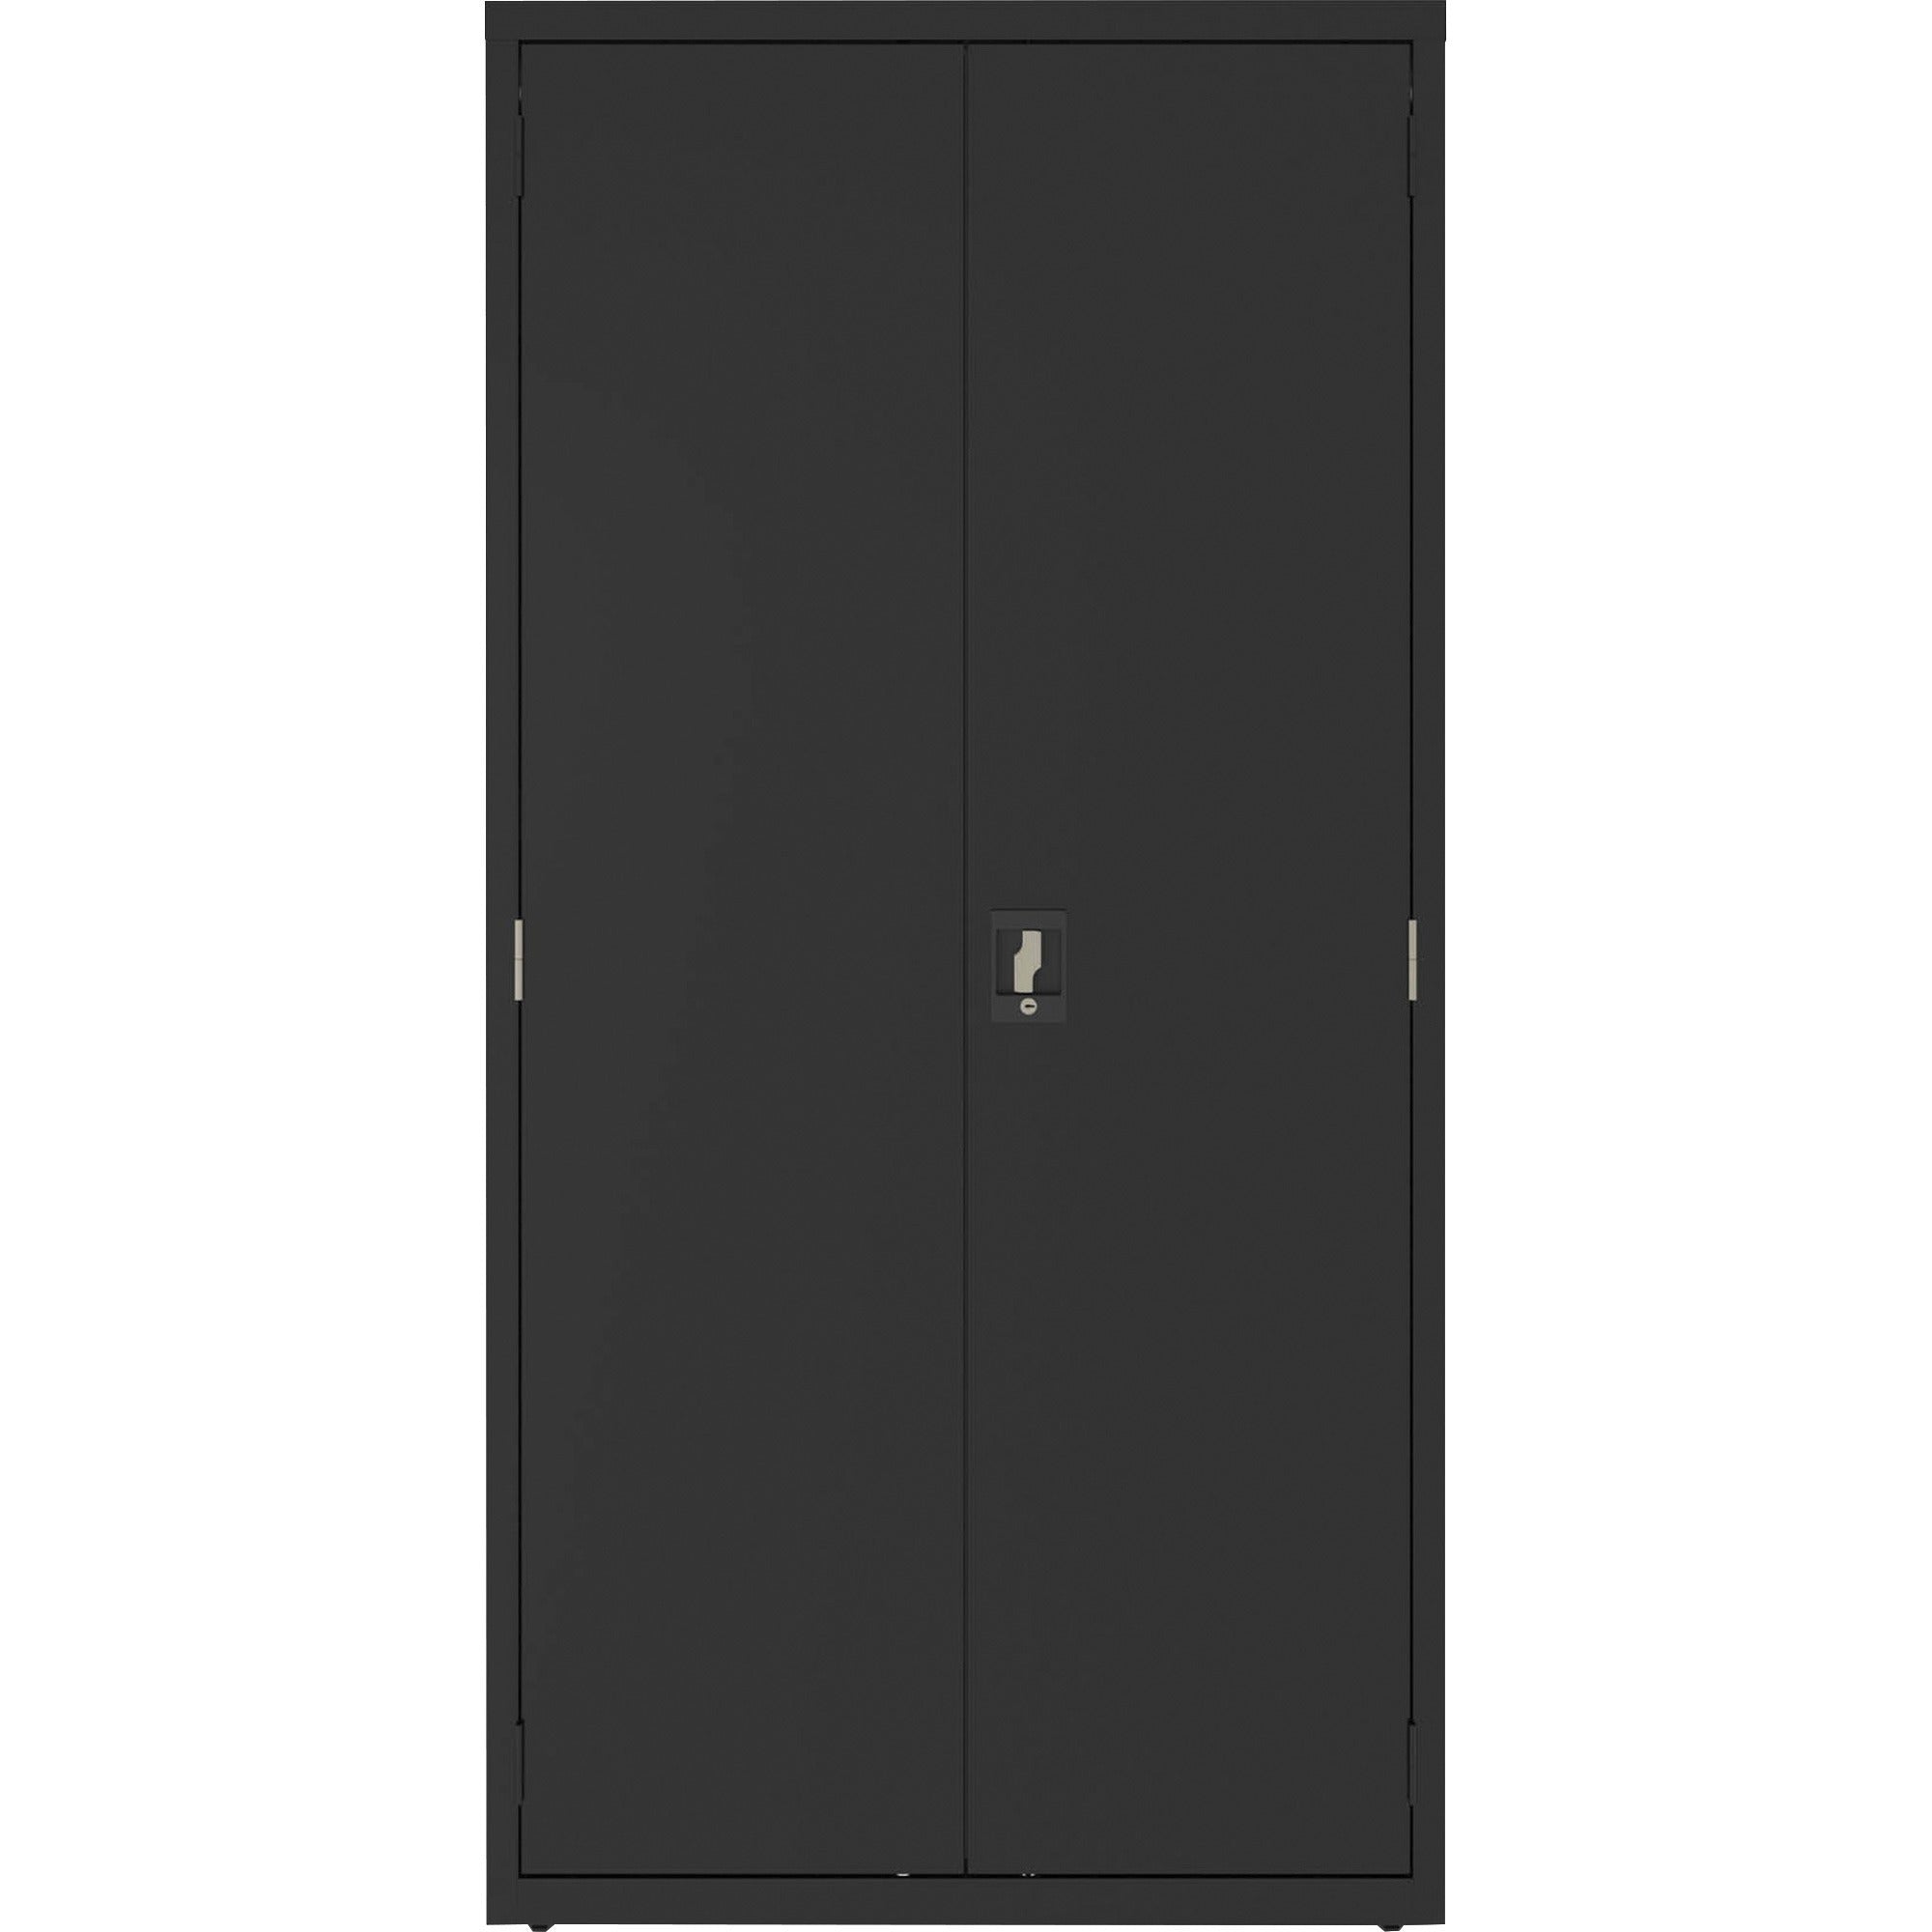 lorell-fortress-series-janitorial-cabinet-36-x-18-x-72-4-x-shelfves-hinged-doors-locking-system-welded-sturdy-recessed-locking-handle-durable-removable-lock-storage-space-adjustable-shelf-black-powder-coated-steel-recycl_llr00018 - 2